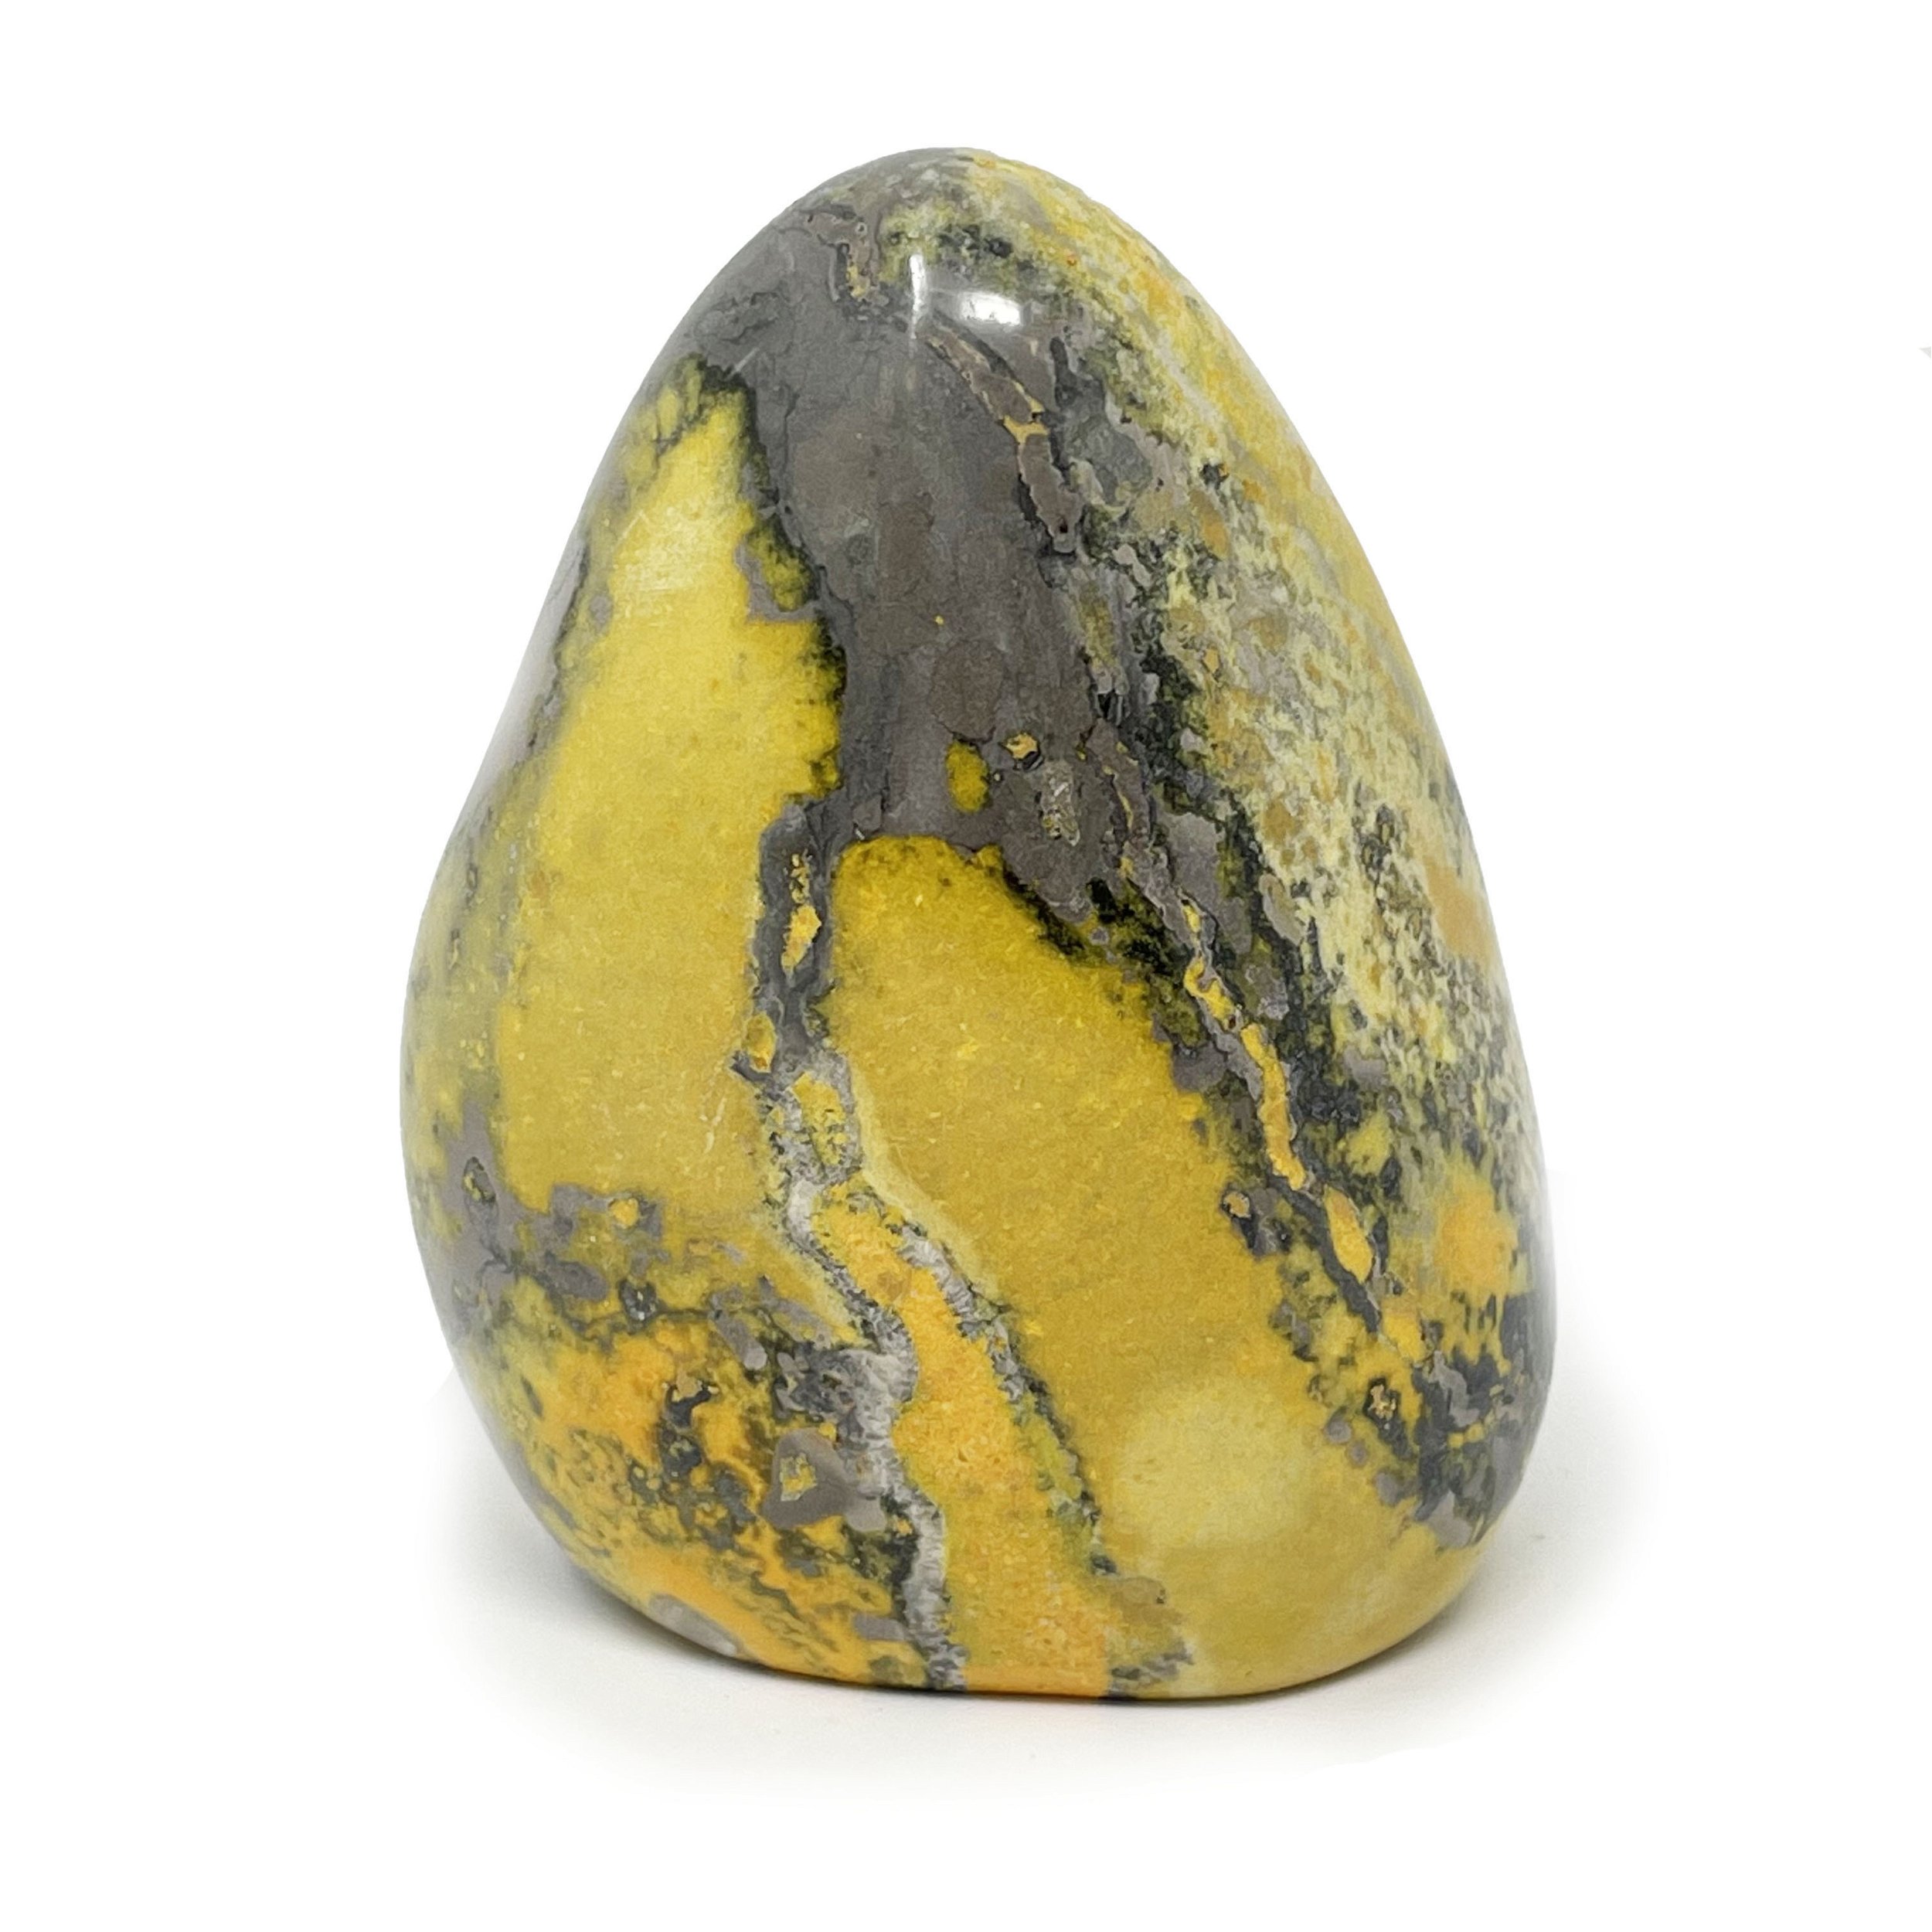 Bumblebee Jasper Freeform Polished Cut Base - Yellow Coloring With Gray Lined Coloring